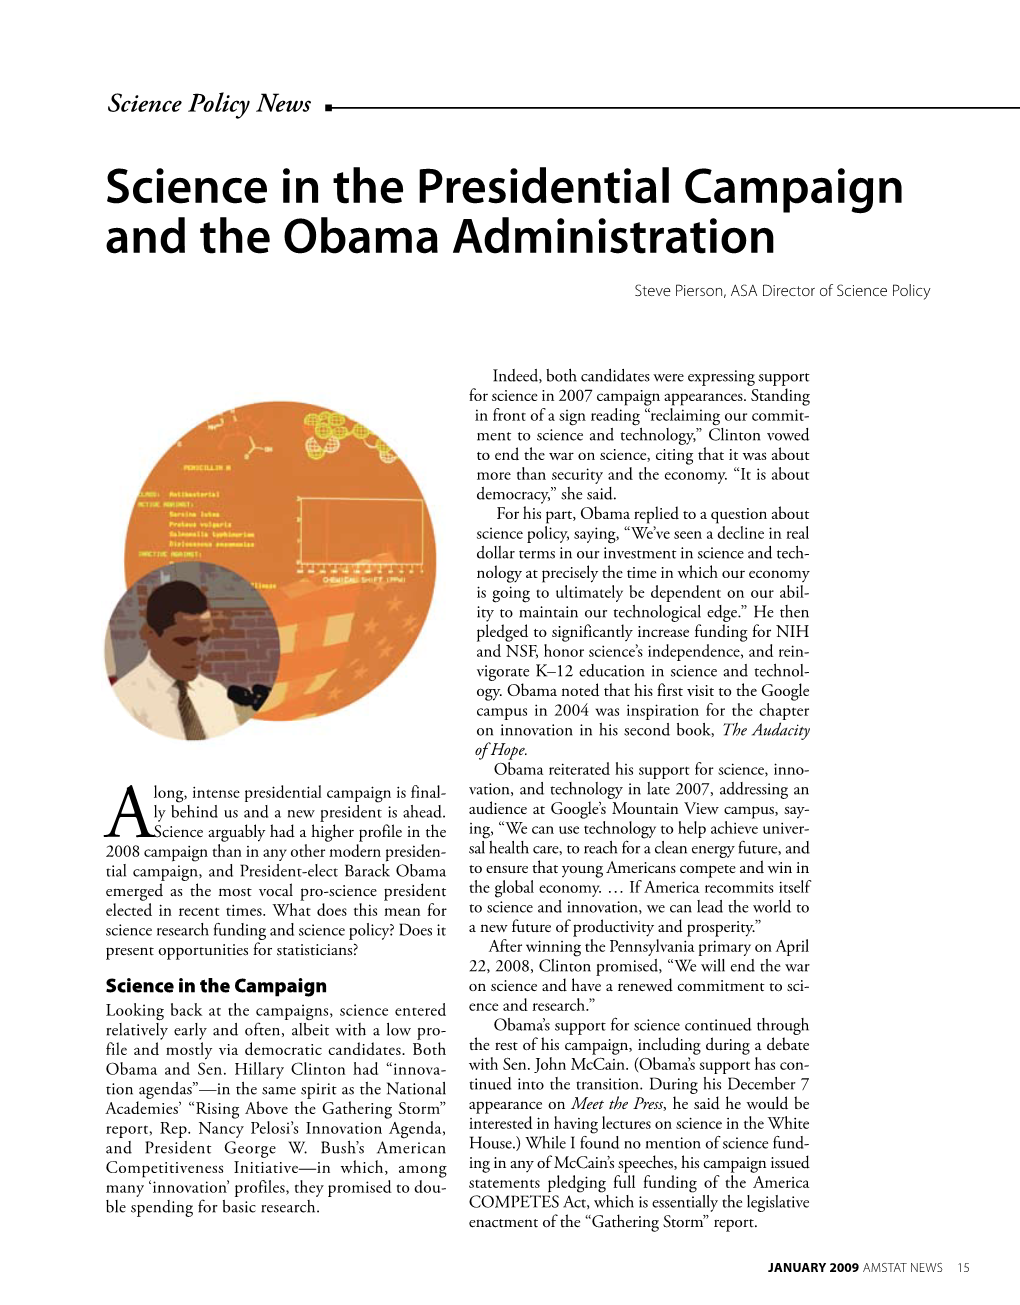 Science in the Presidential Campaign and the Obama Administration